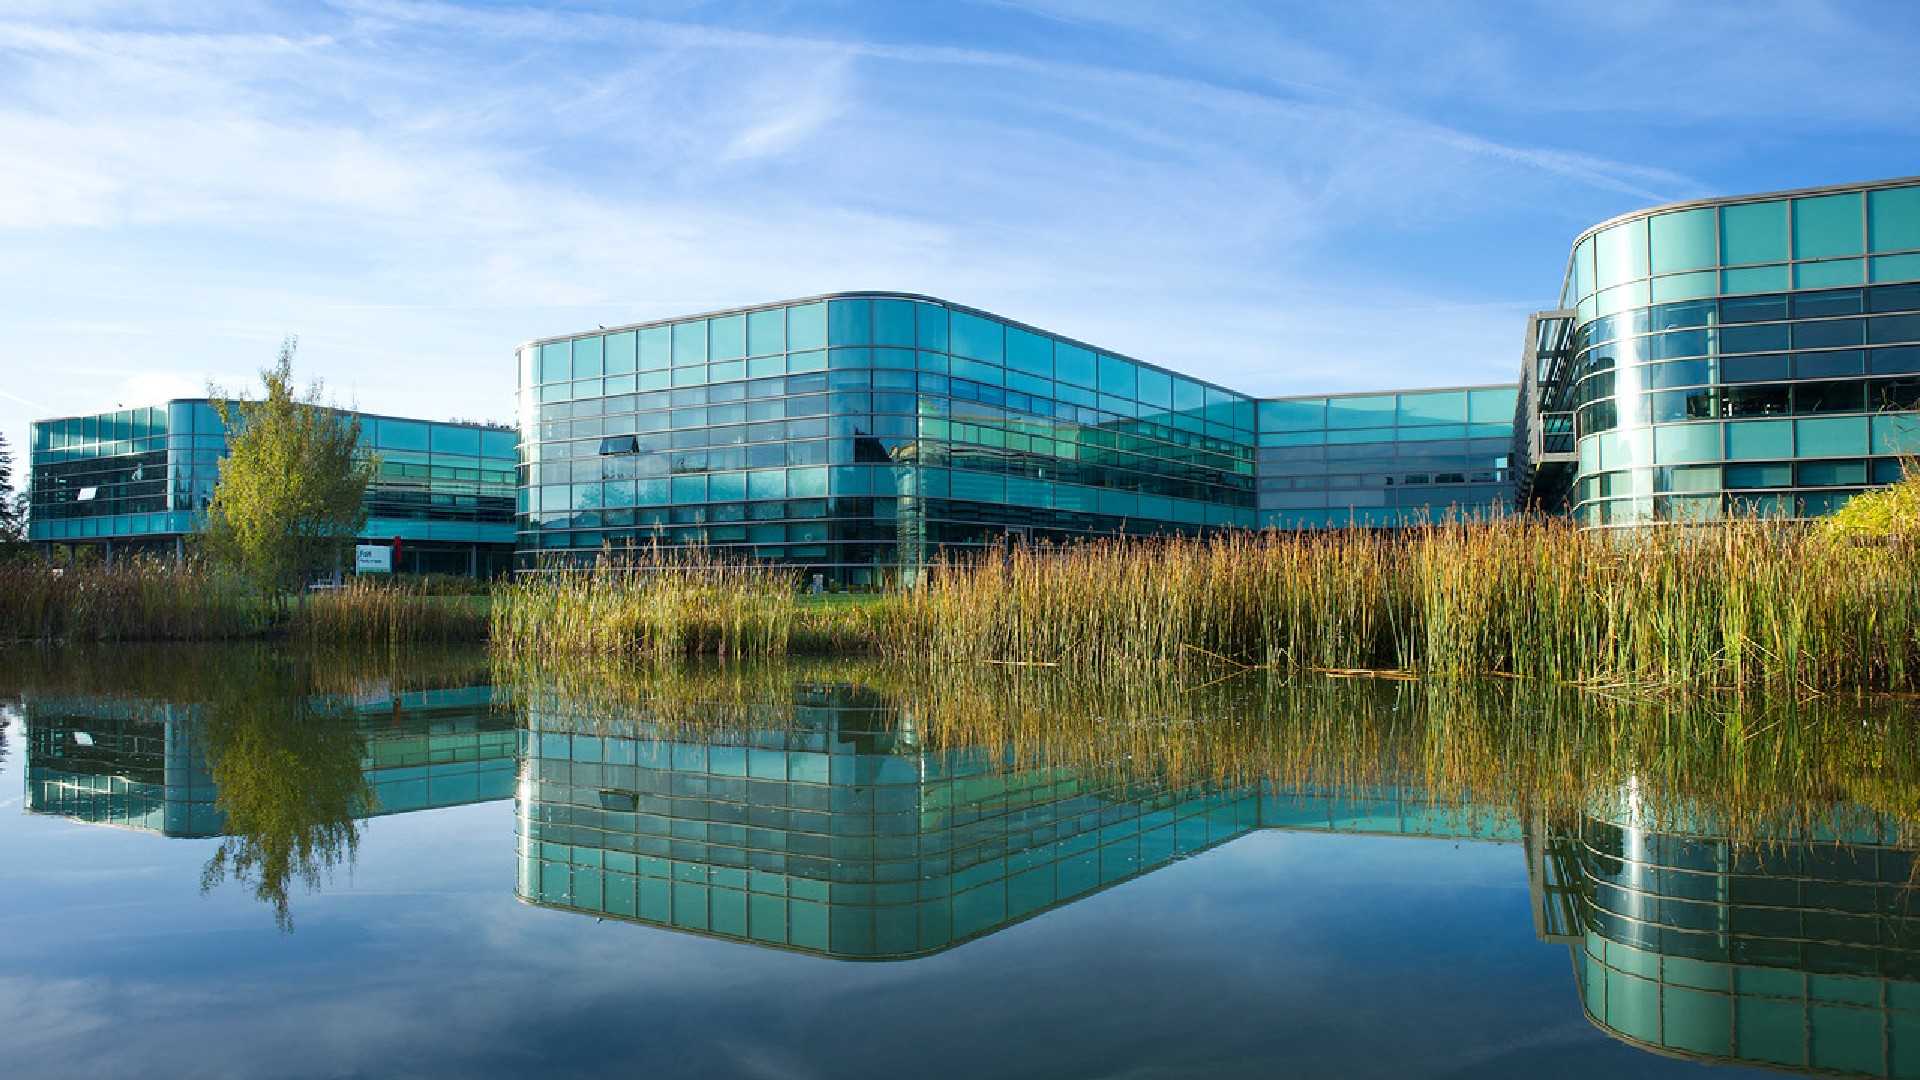 An image of the health department building at Edge Hill, there is a tall glass building in the image, in the foreground of the image there is a lake which has a reflection of the building on.